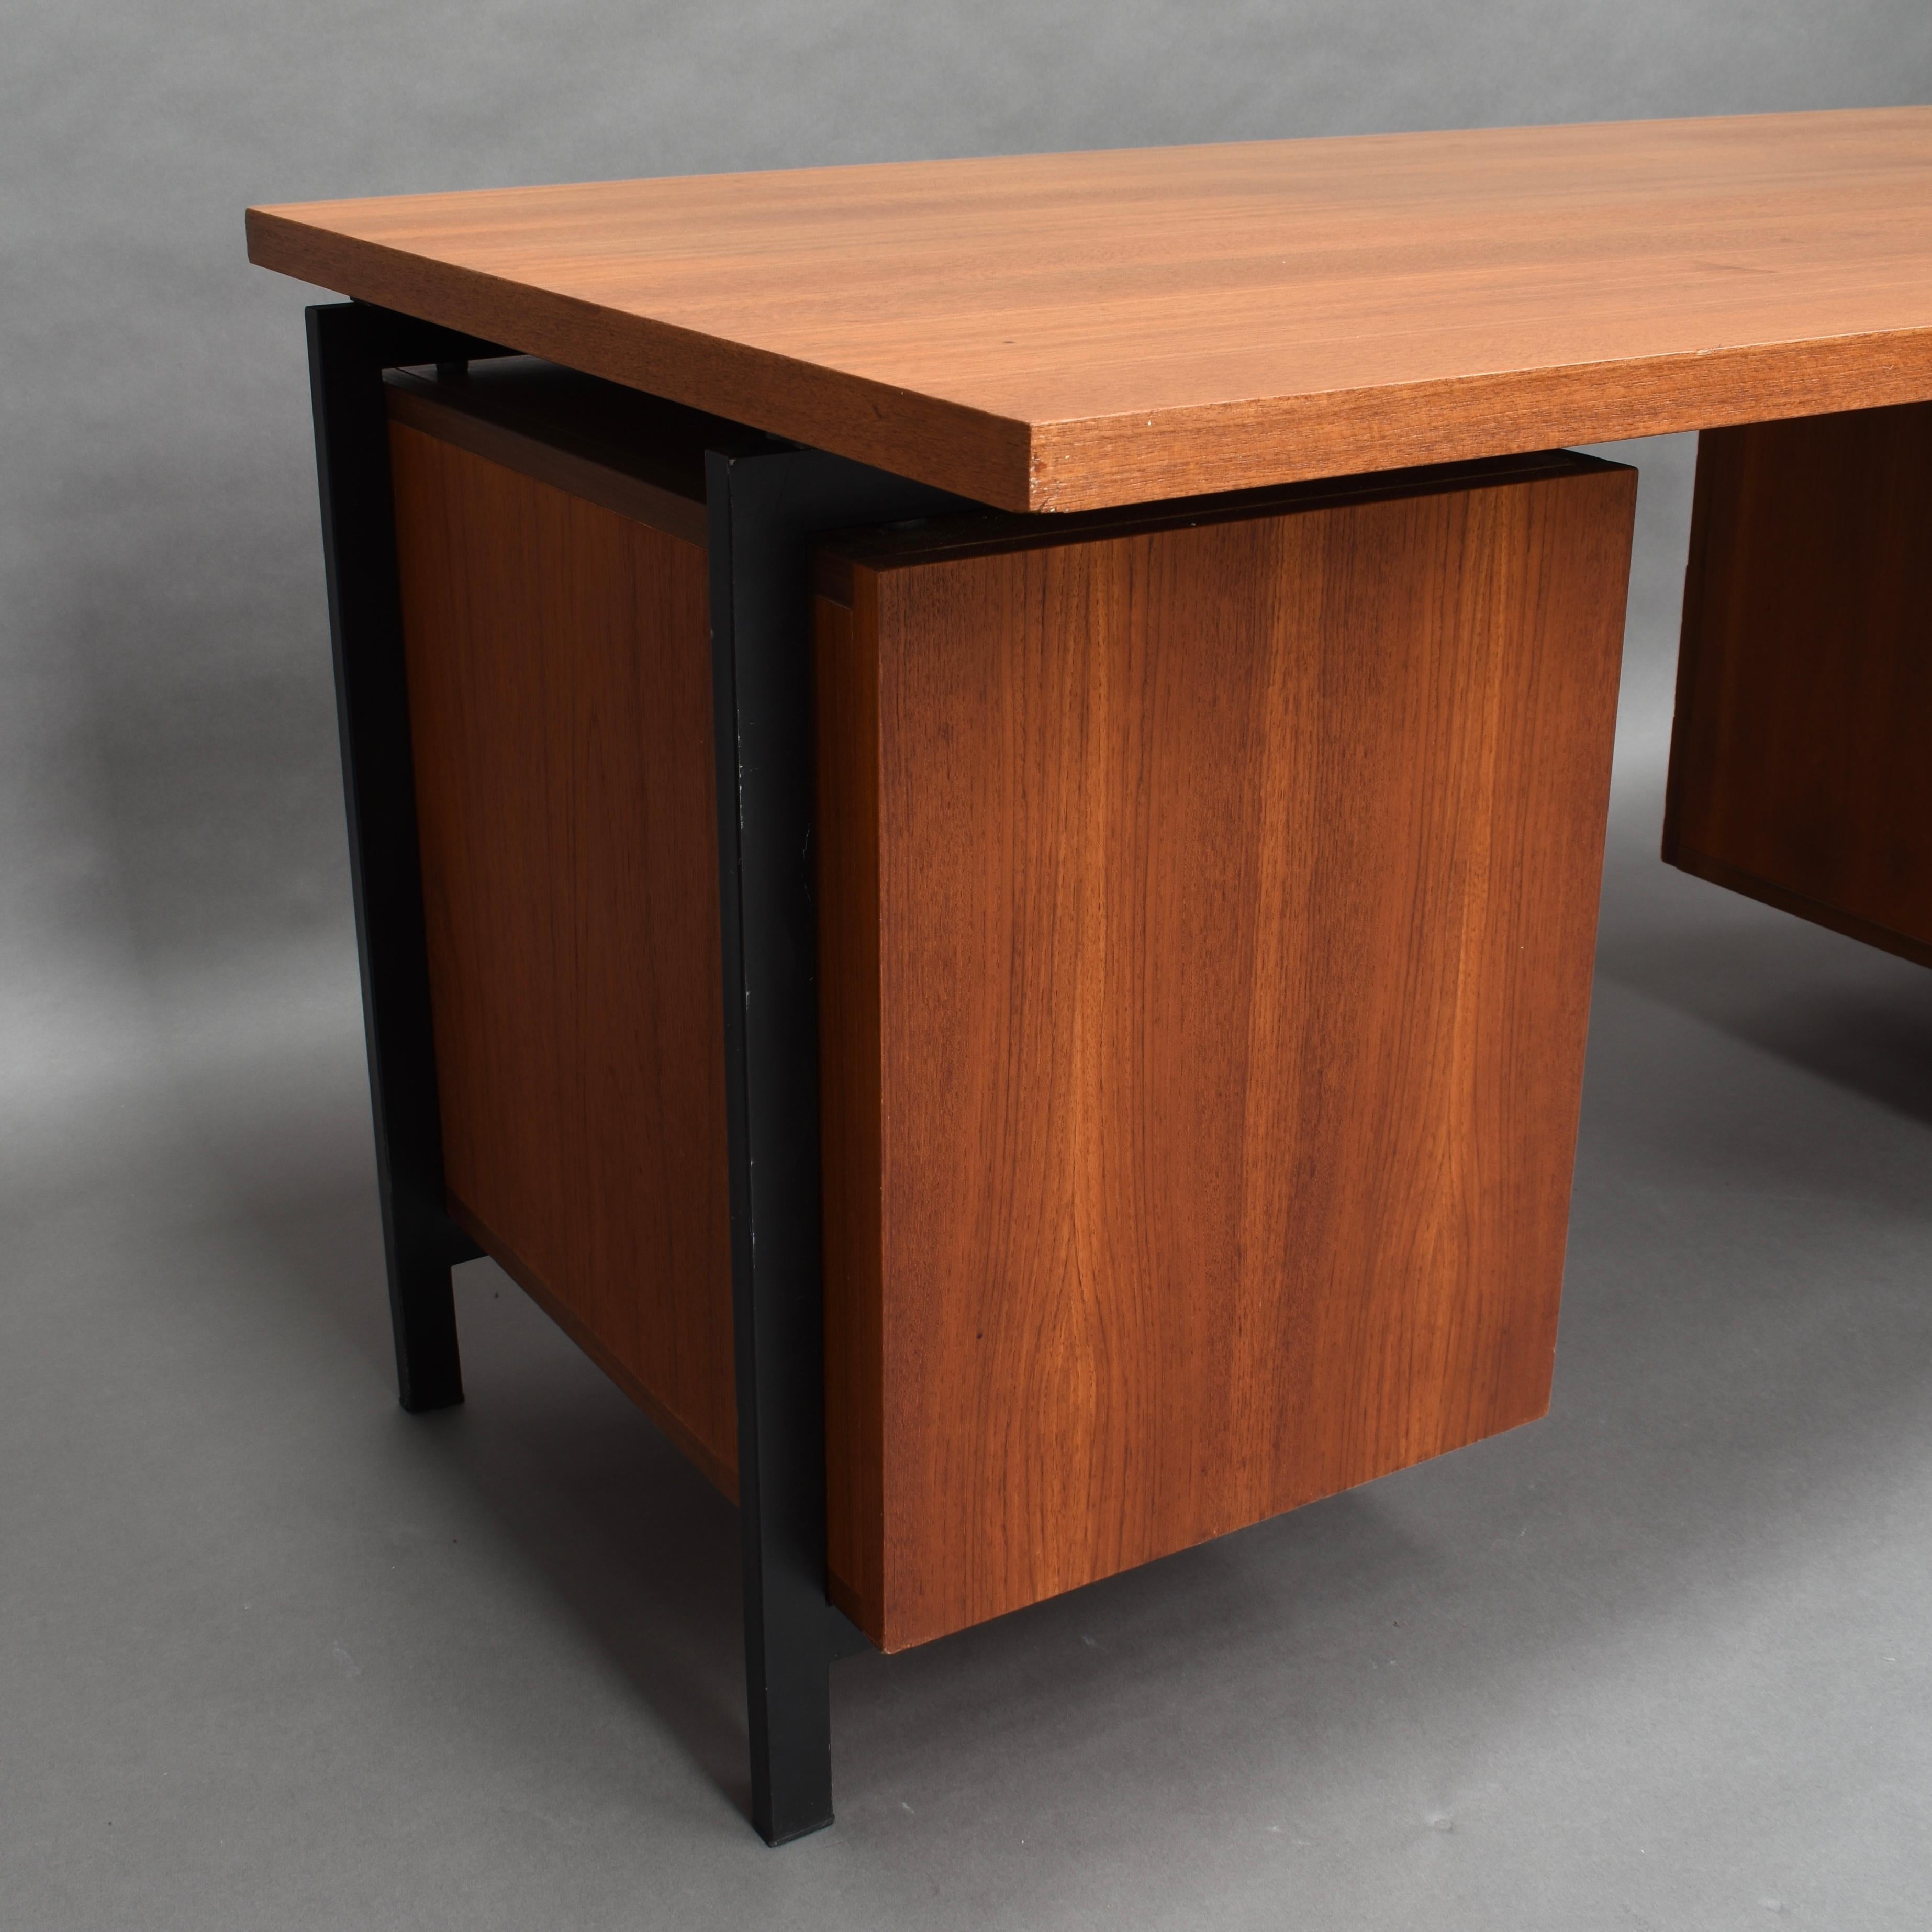 Cees Braakman for Pastoe Model EU02 Japanese Series Desk and Chair in Teak, 1950 For Sale 2